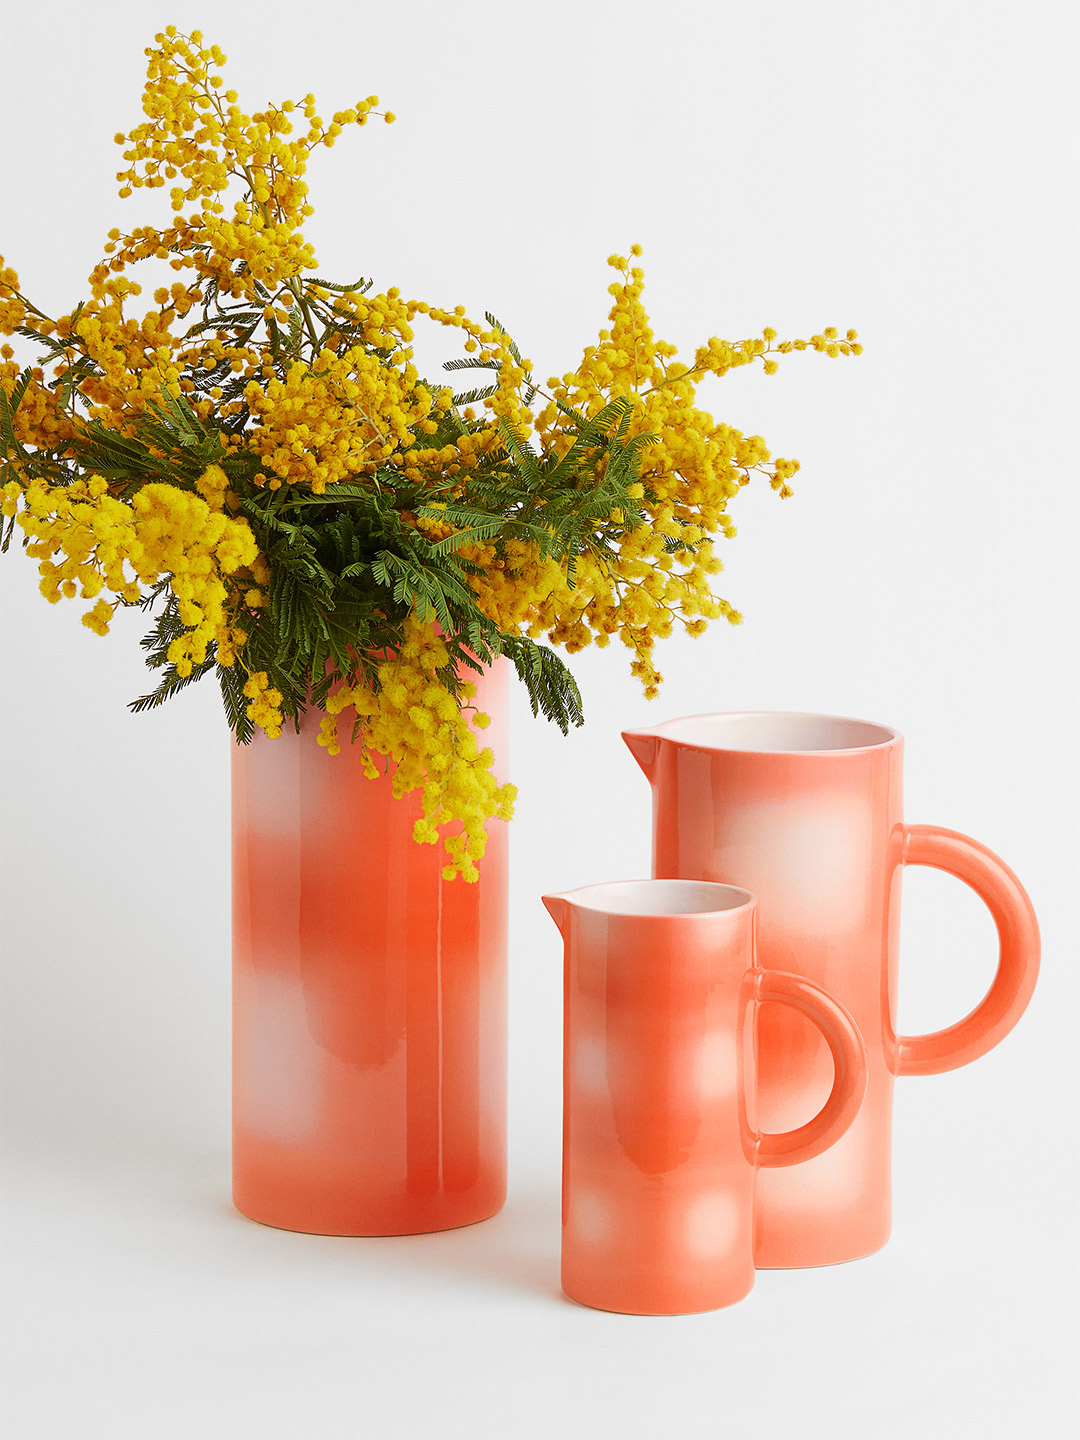 Colour-drenched homewares by India Mahdavi just dropped at H&M